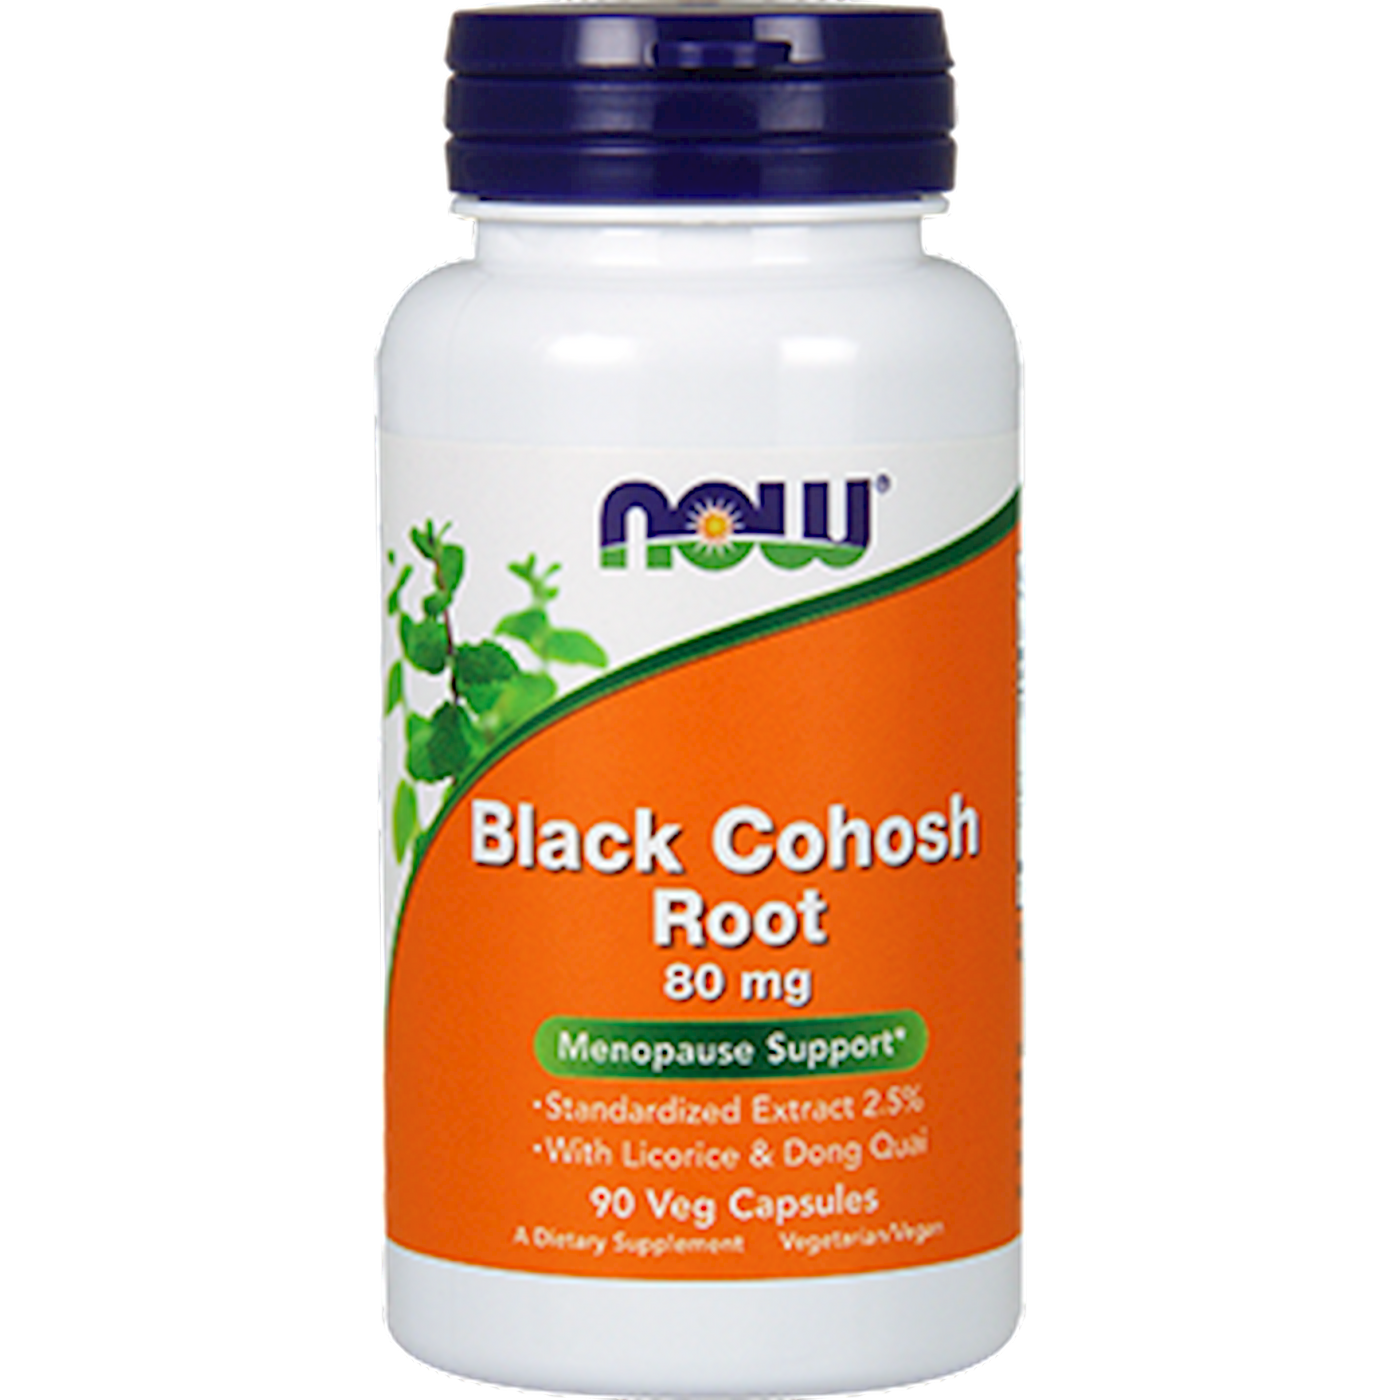 Black Cohosh Extract 80 mg 90 vegcaps Curated Wellness